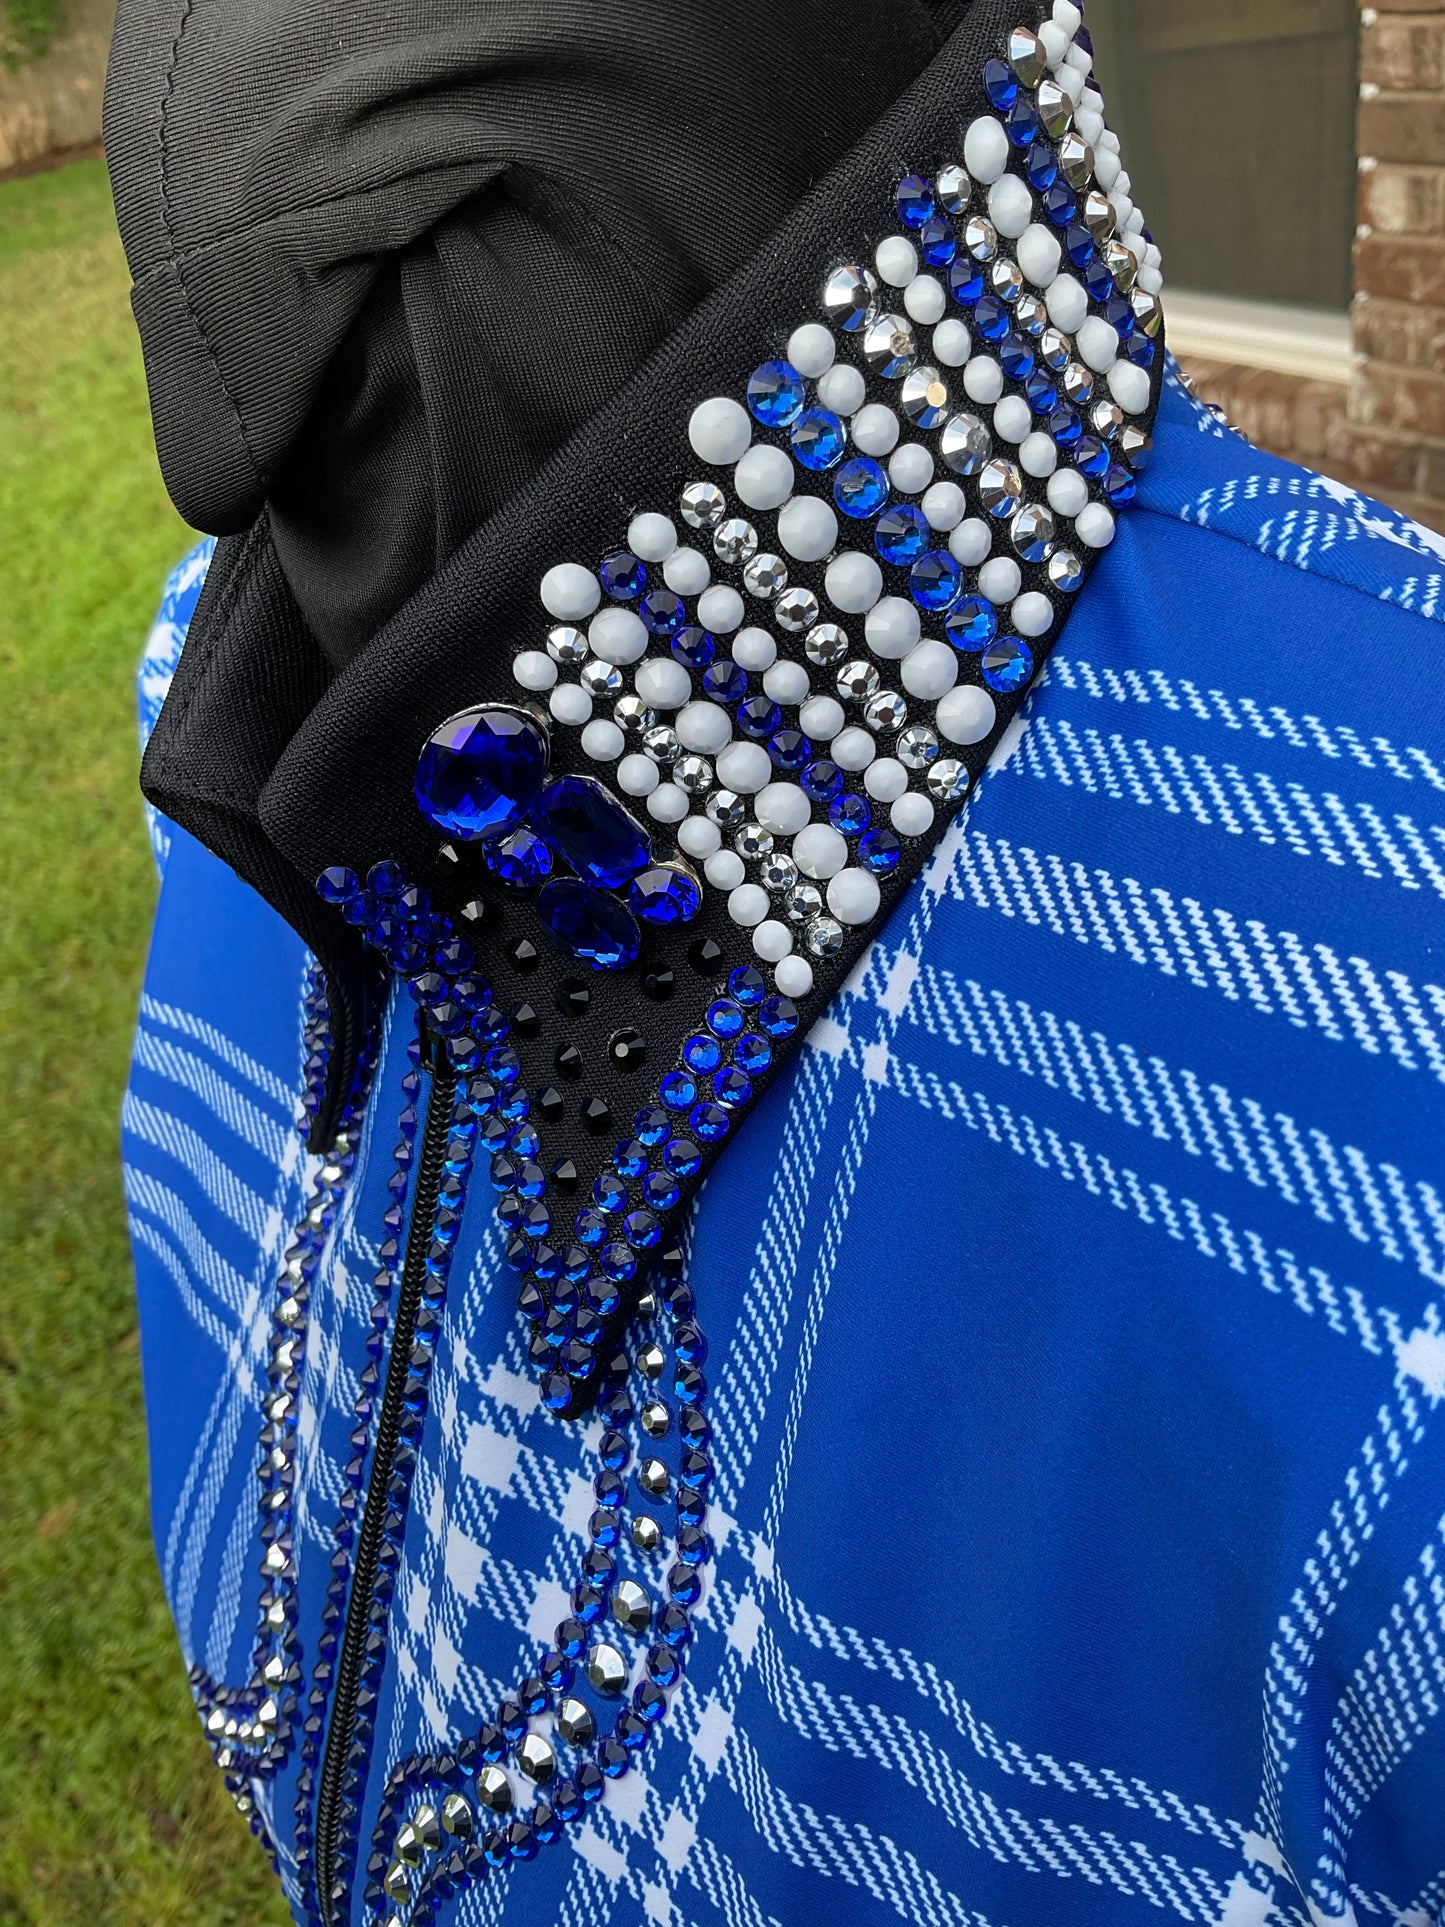 Size medium stretch Blue and White Plaid with Silver